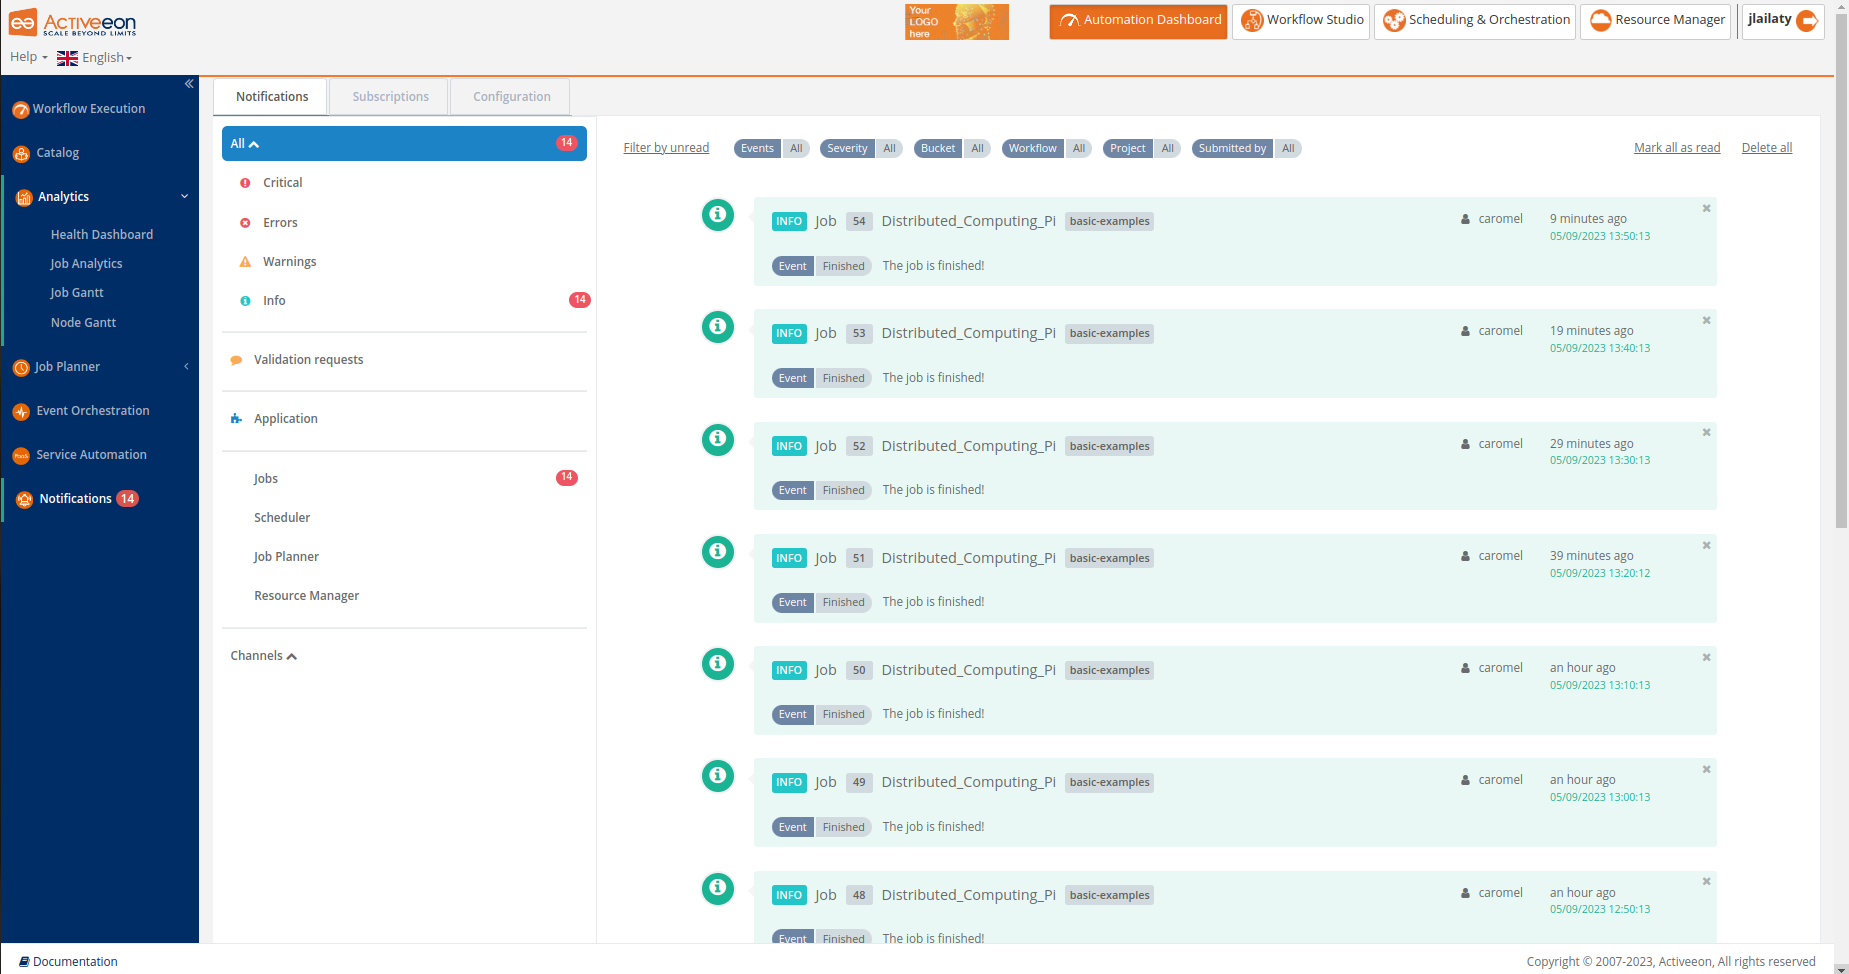 HubSpot introduces Bootstrap Latin America to boost startups •